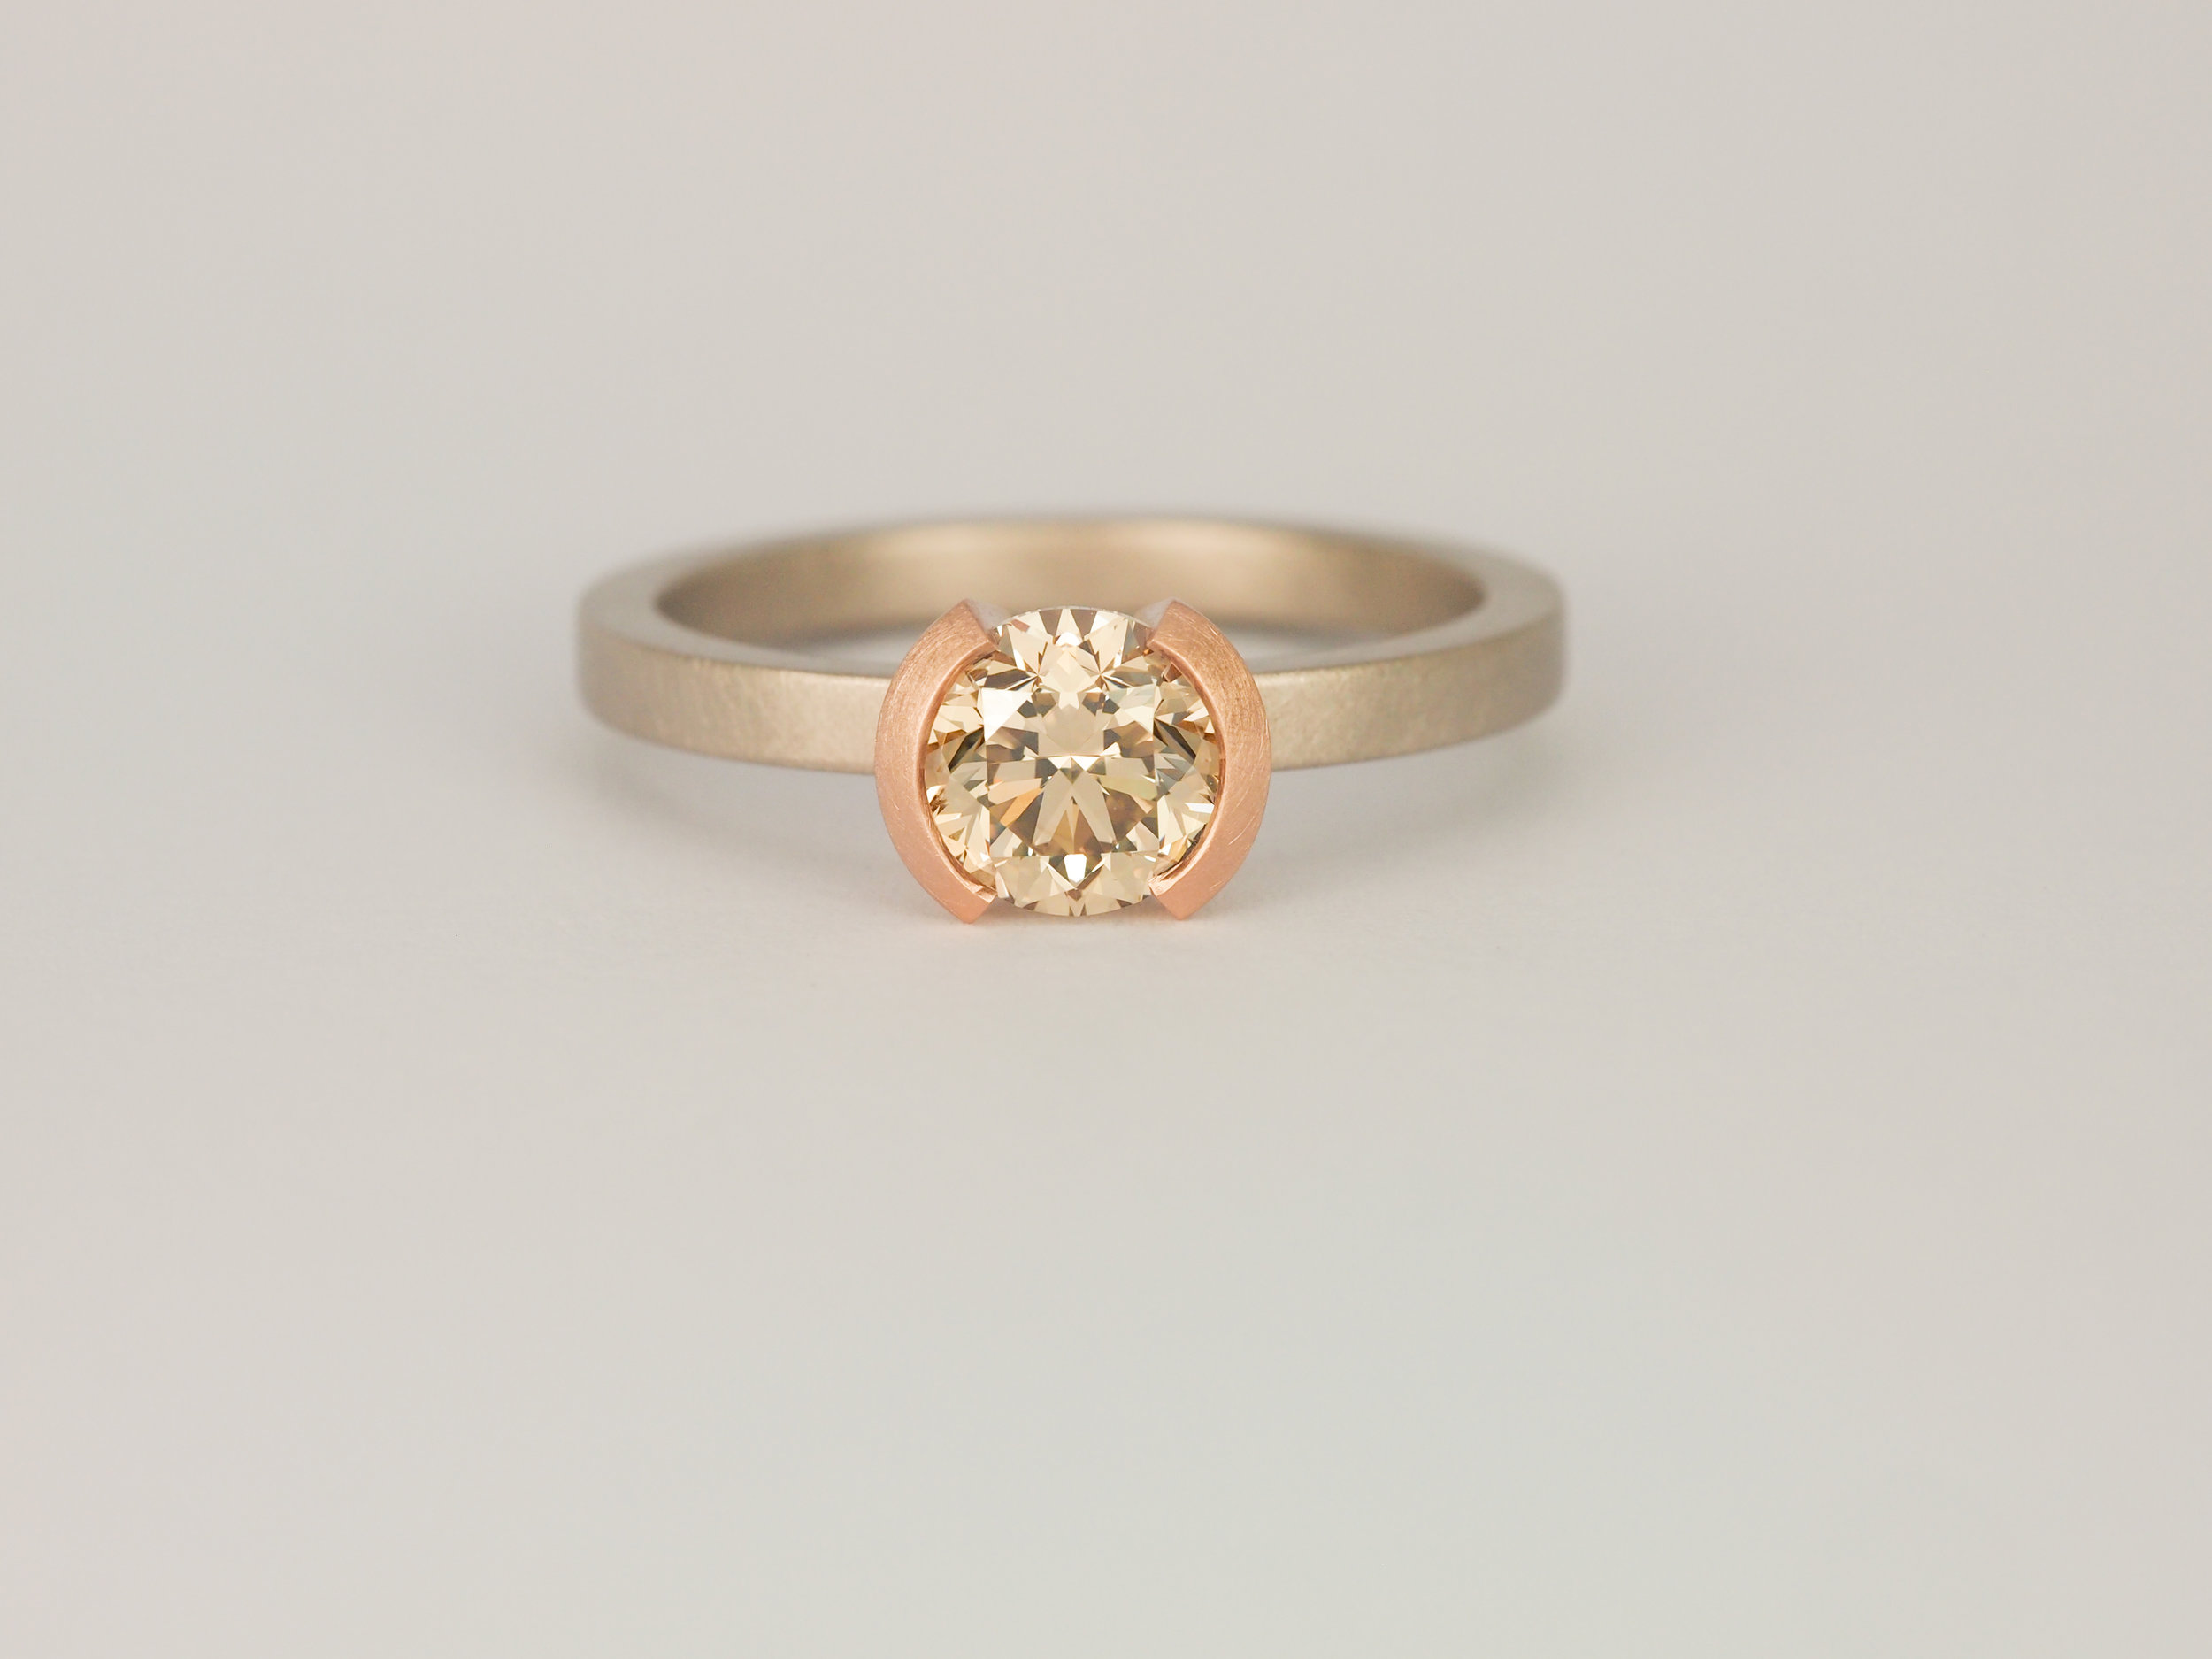  Champagne diamond rose gold and grey white gold engagement ring  